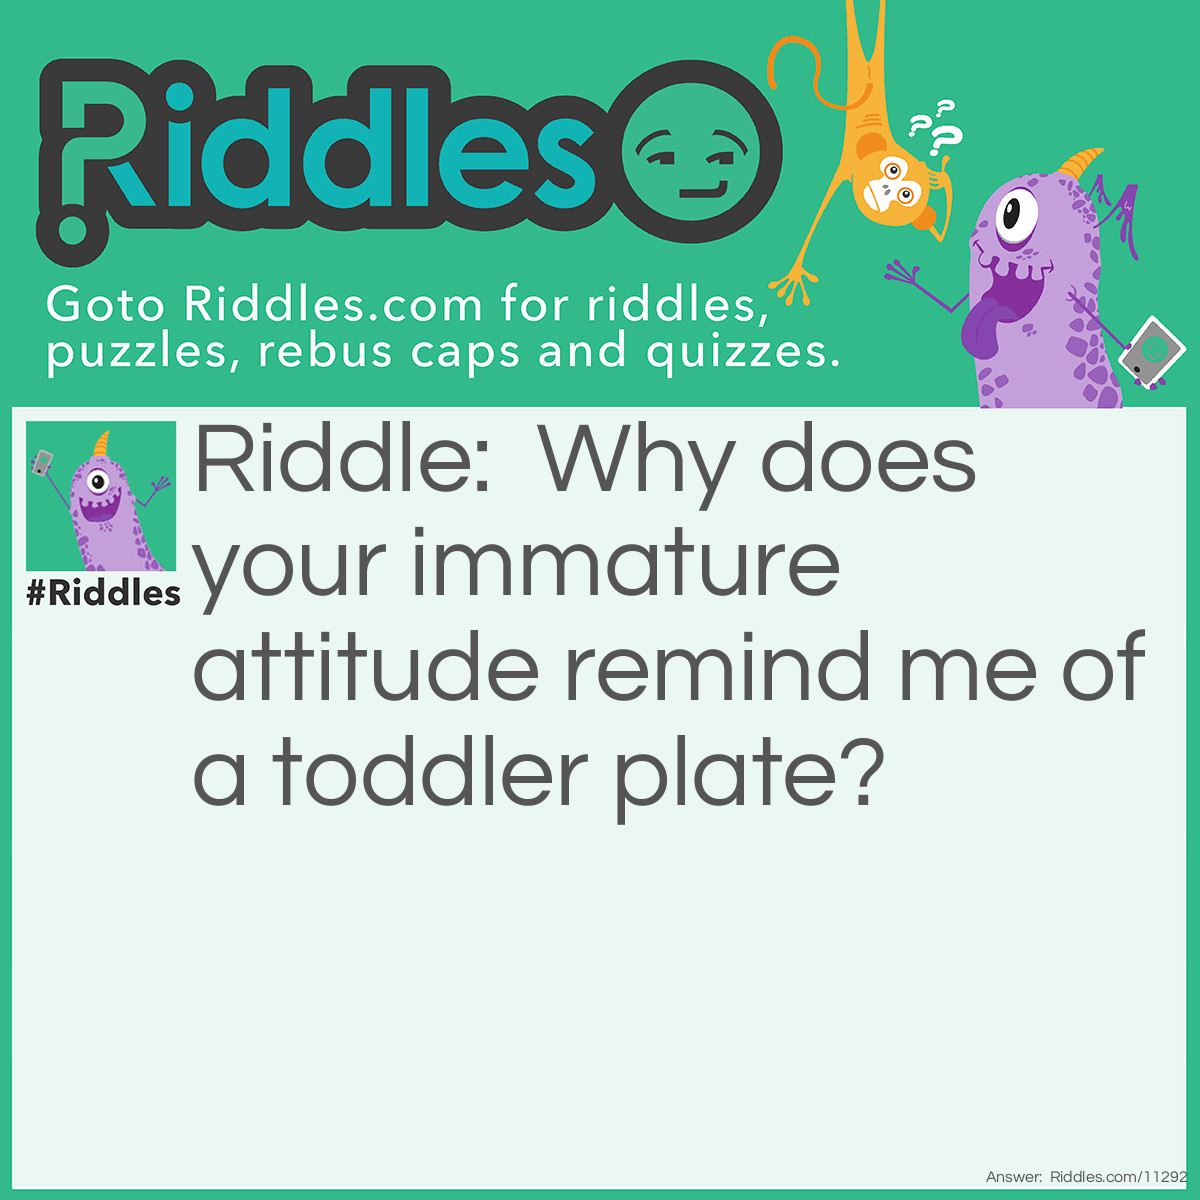 Riddle: Why does your immature attitude remind me of a toddler plate? Answer: Child-dish